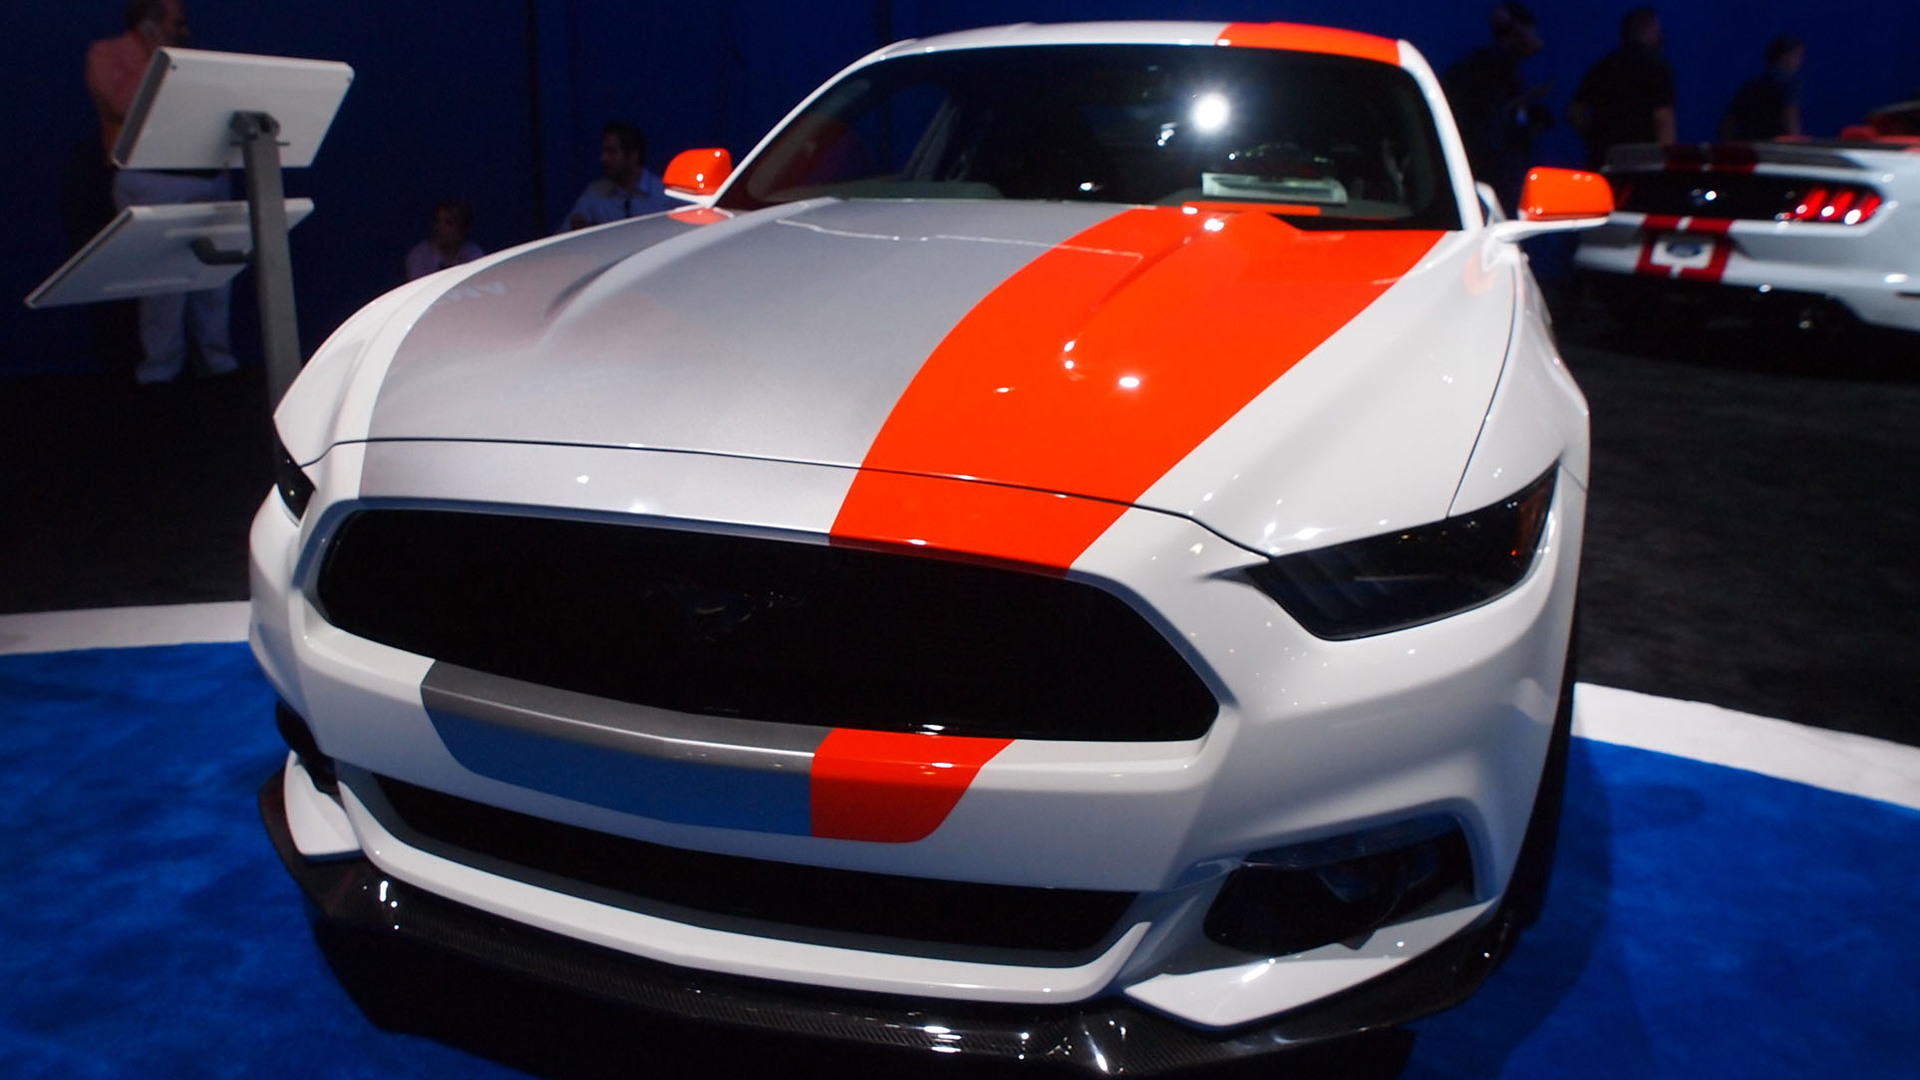 2016 Ford Mustang by Bojix Design, 2015 SEMA show